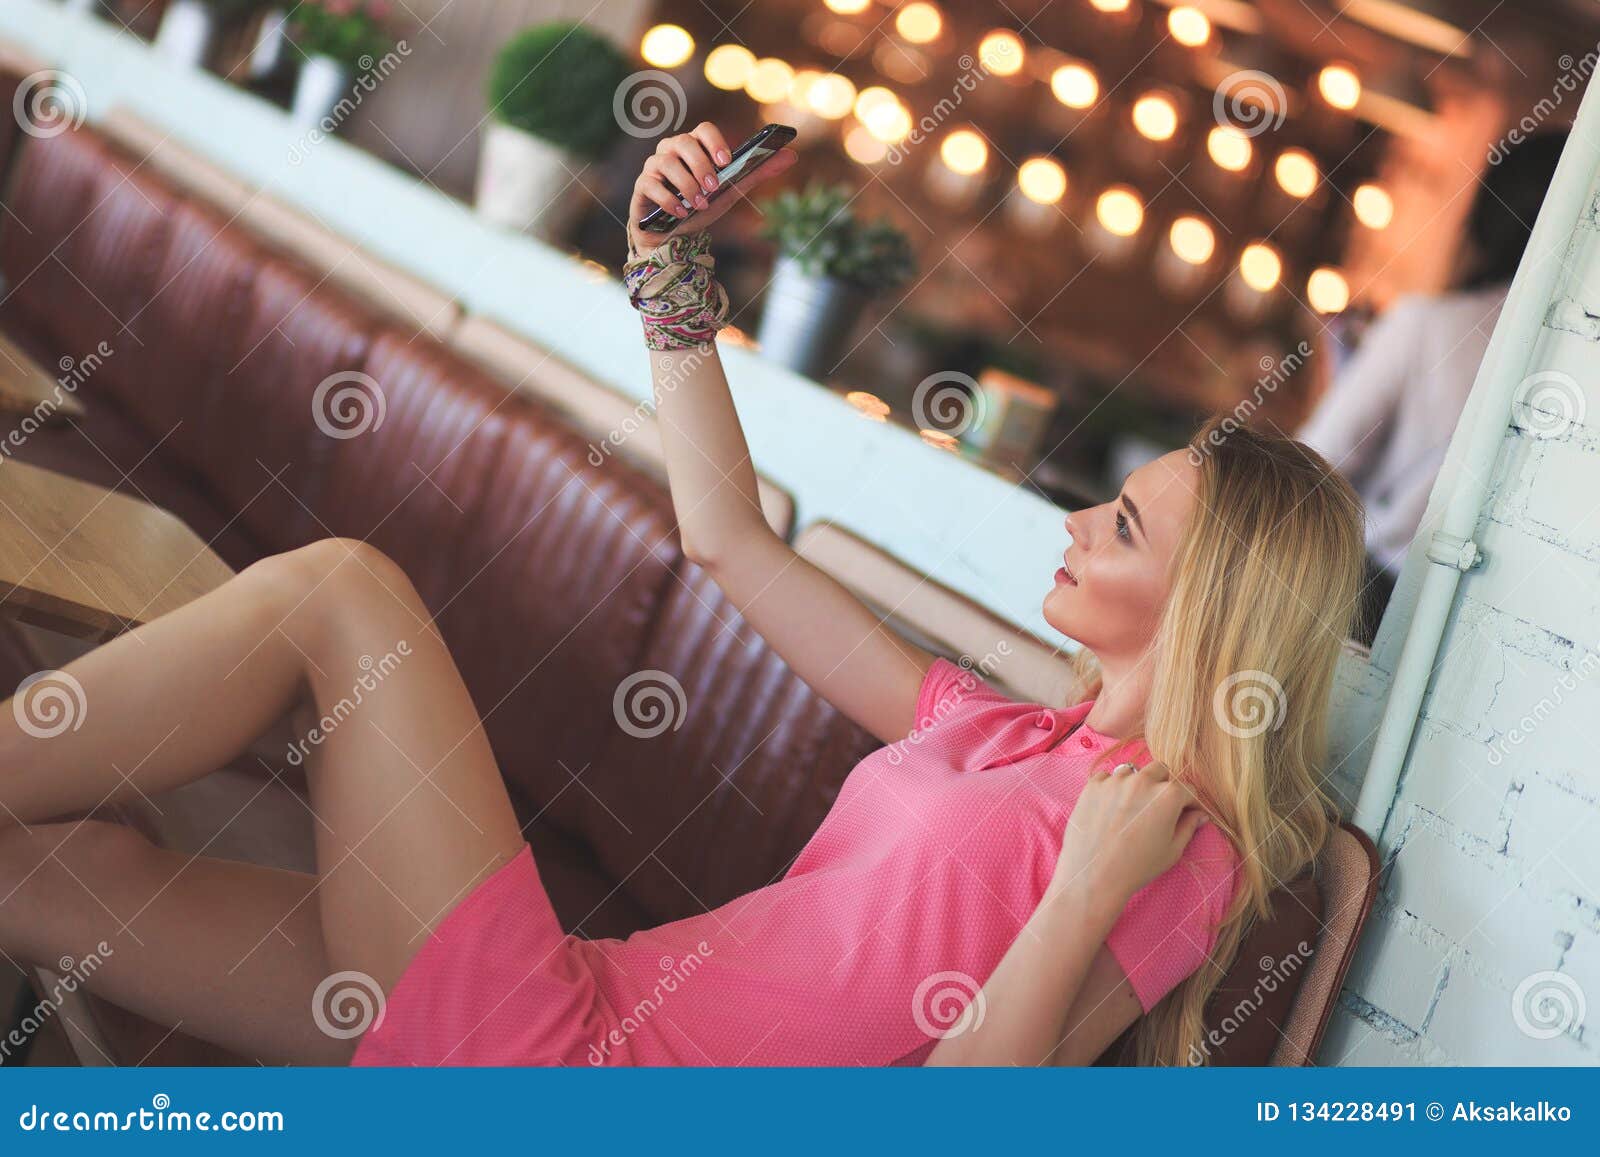 Blonde girl taking a selfie with her hair down - wide 8